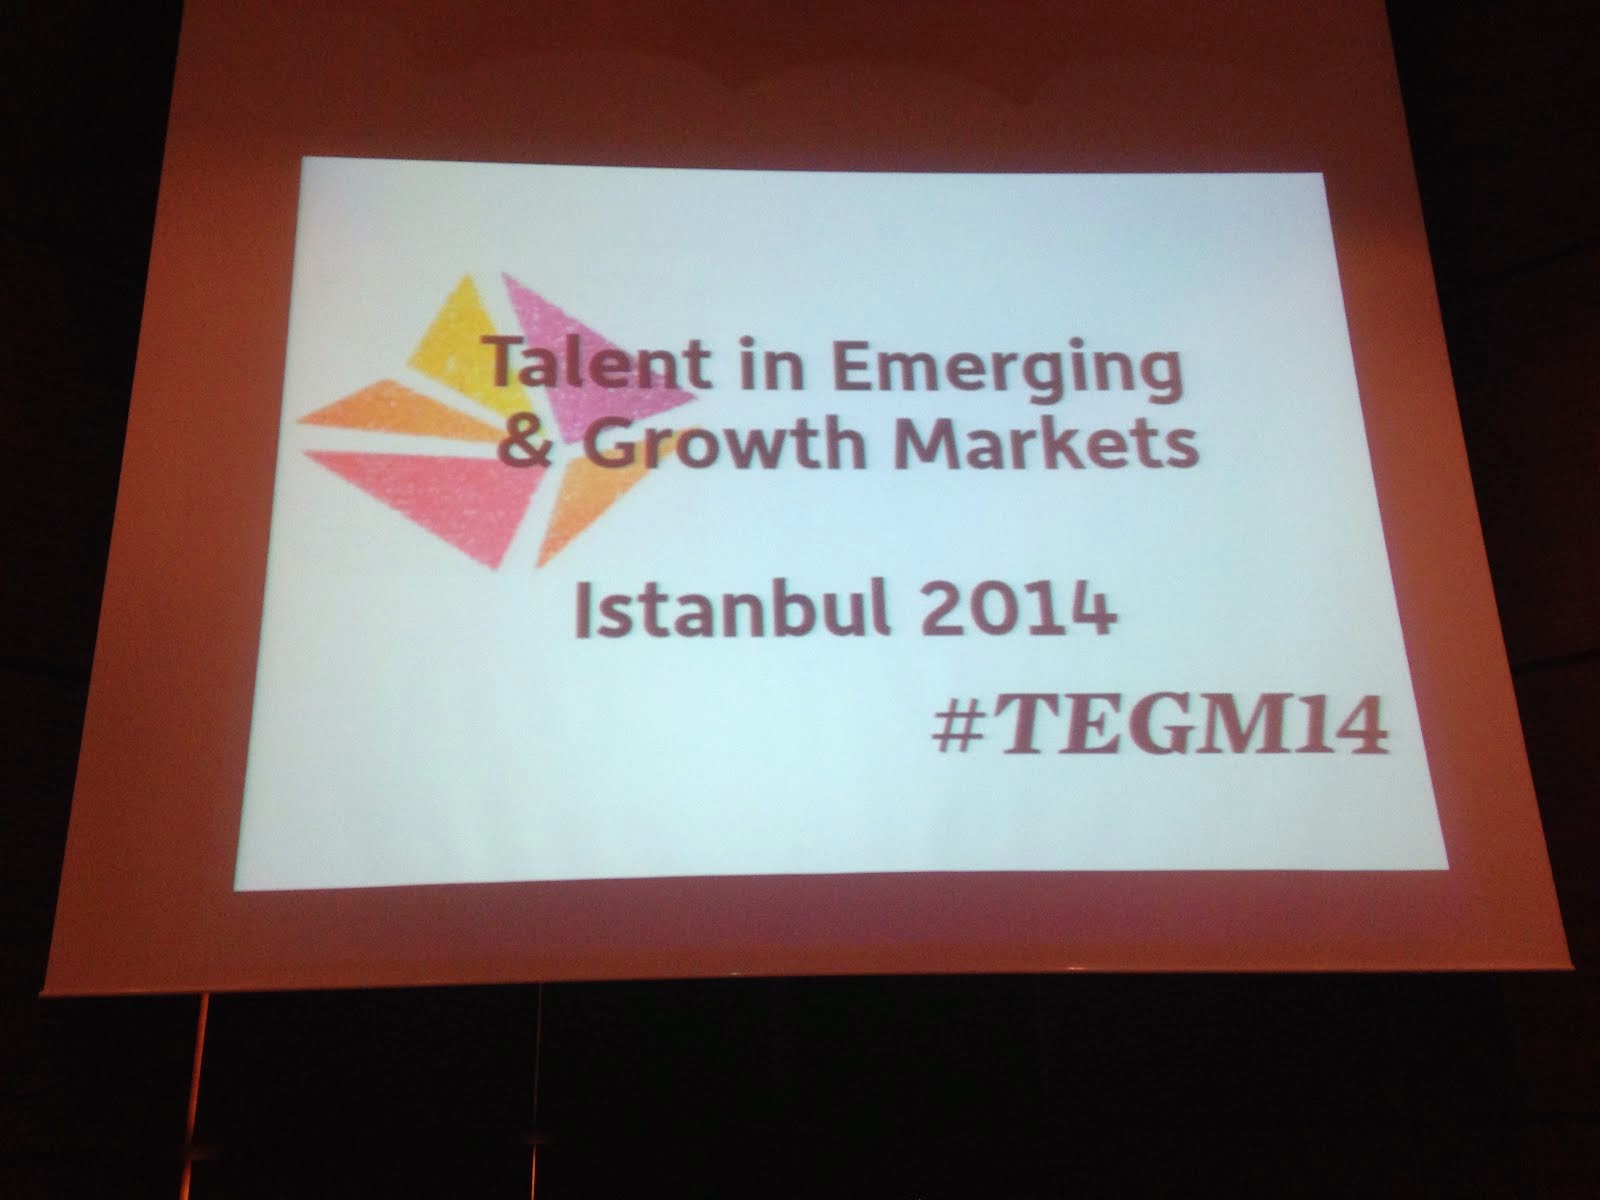 Talent in Emerging & Growth Markets, Istanbul, June 4-5, 2014